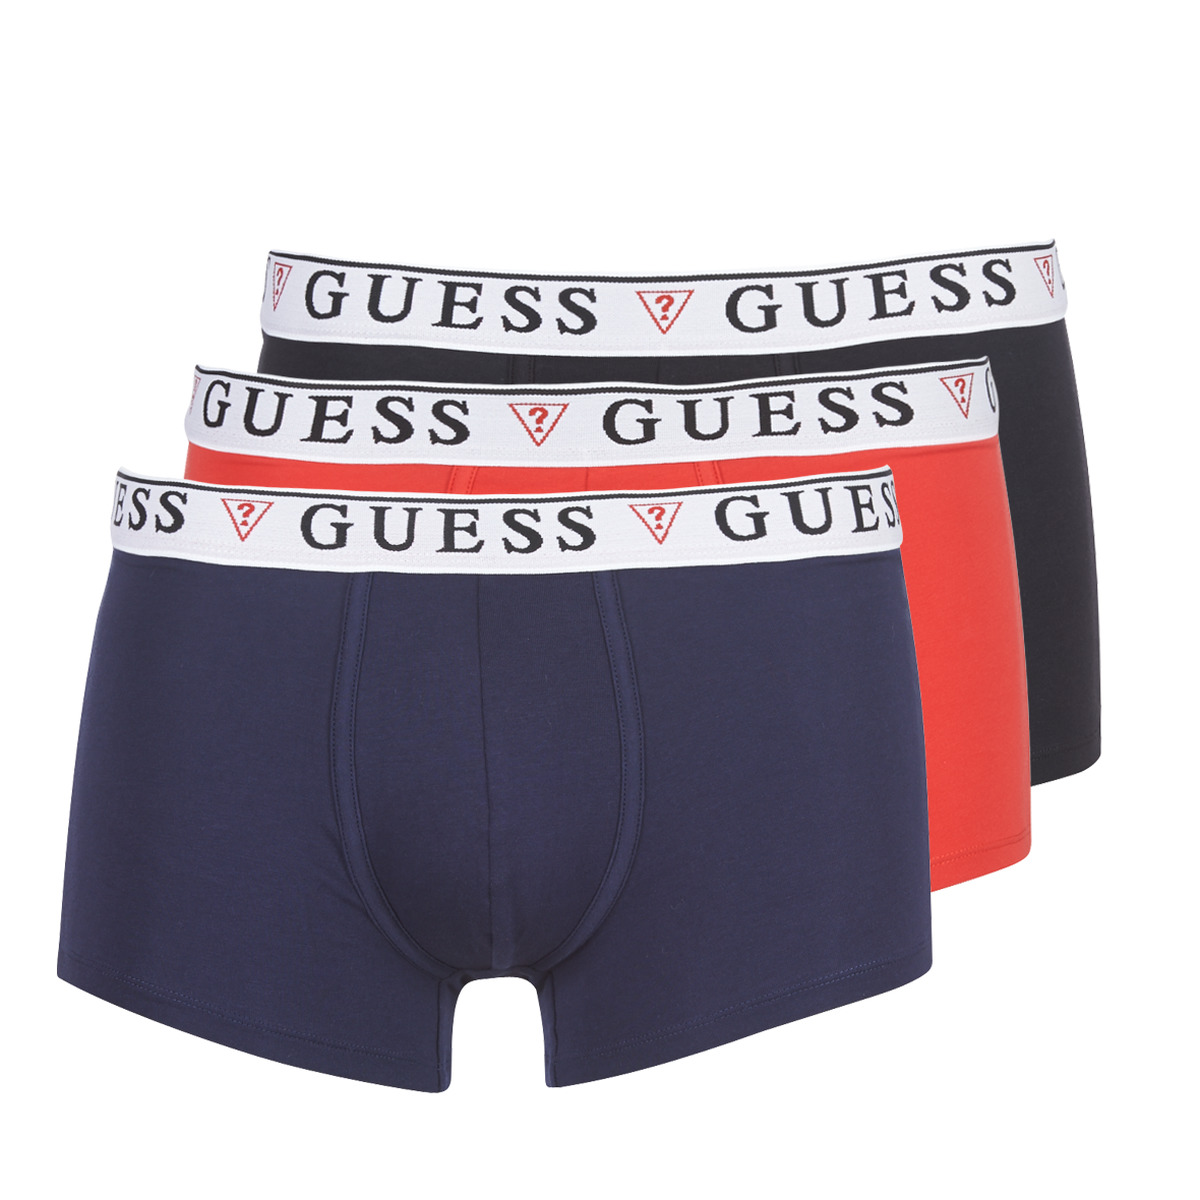 Bokserit Guess BRIAN BOXER TRUNK PACK X4 L